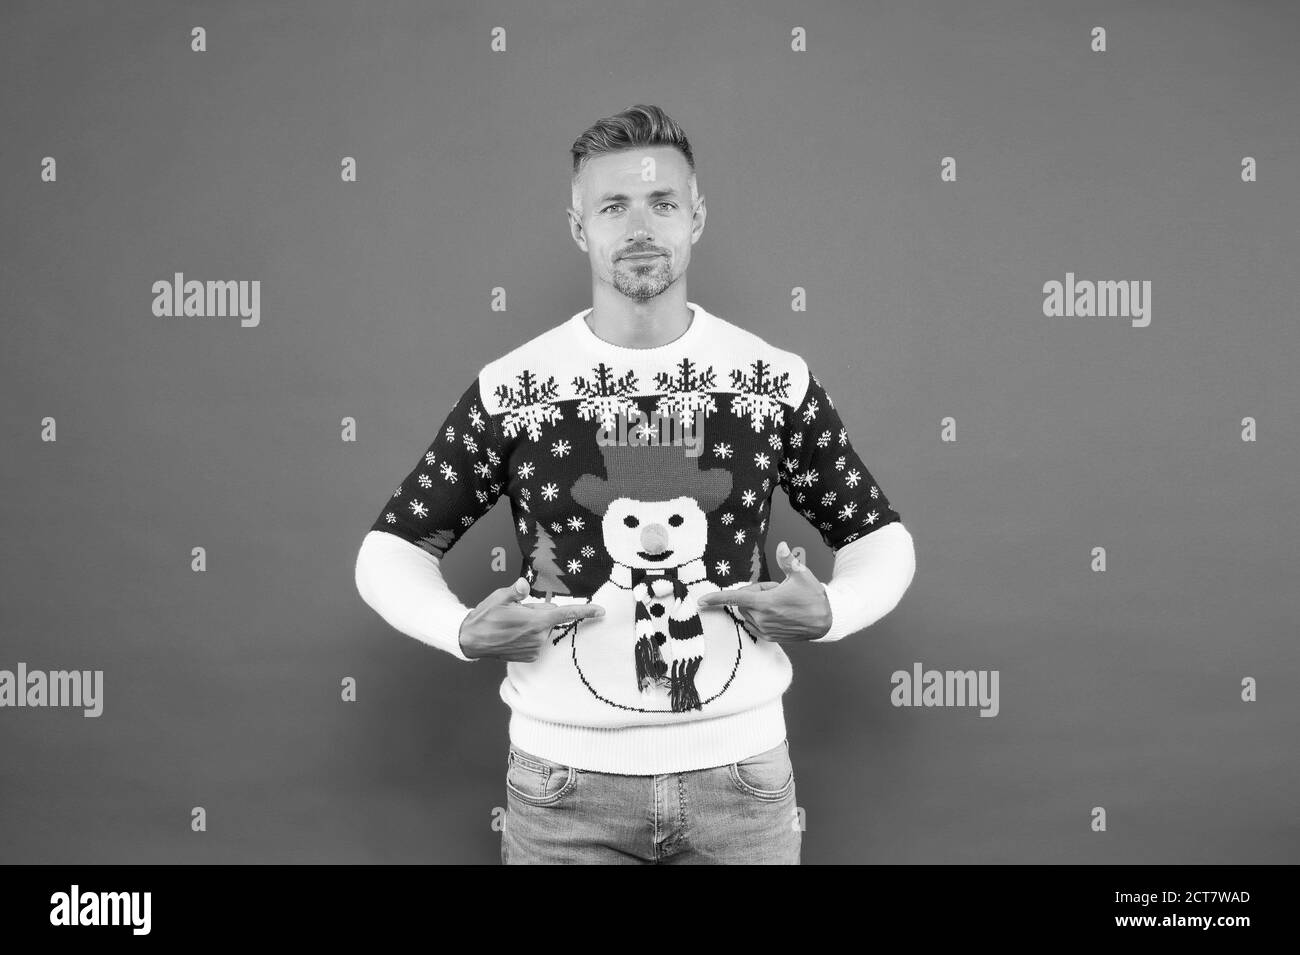 Product for sale. Handsome man point fingers at snowman christmas jumper. What to wear for christmas party. Christmas outfit for stylish celebration. Merry christmas. Happy new year. Stock Photo